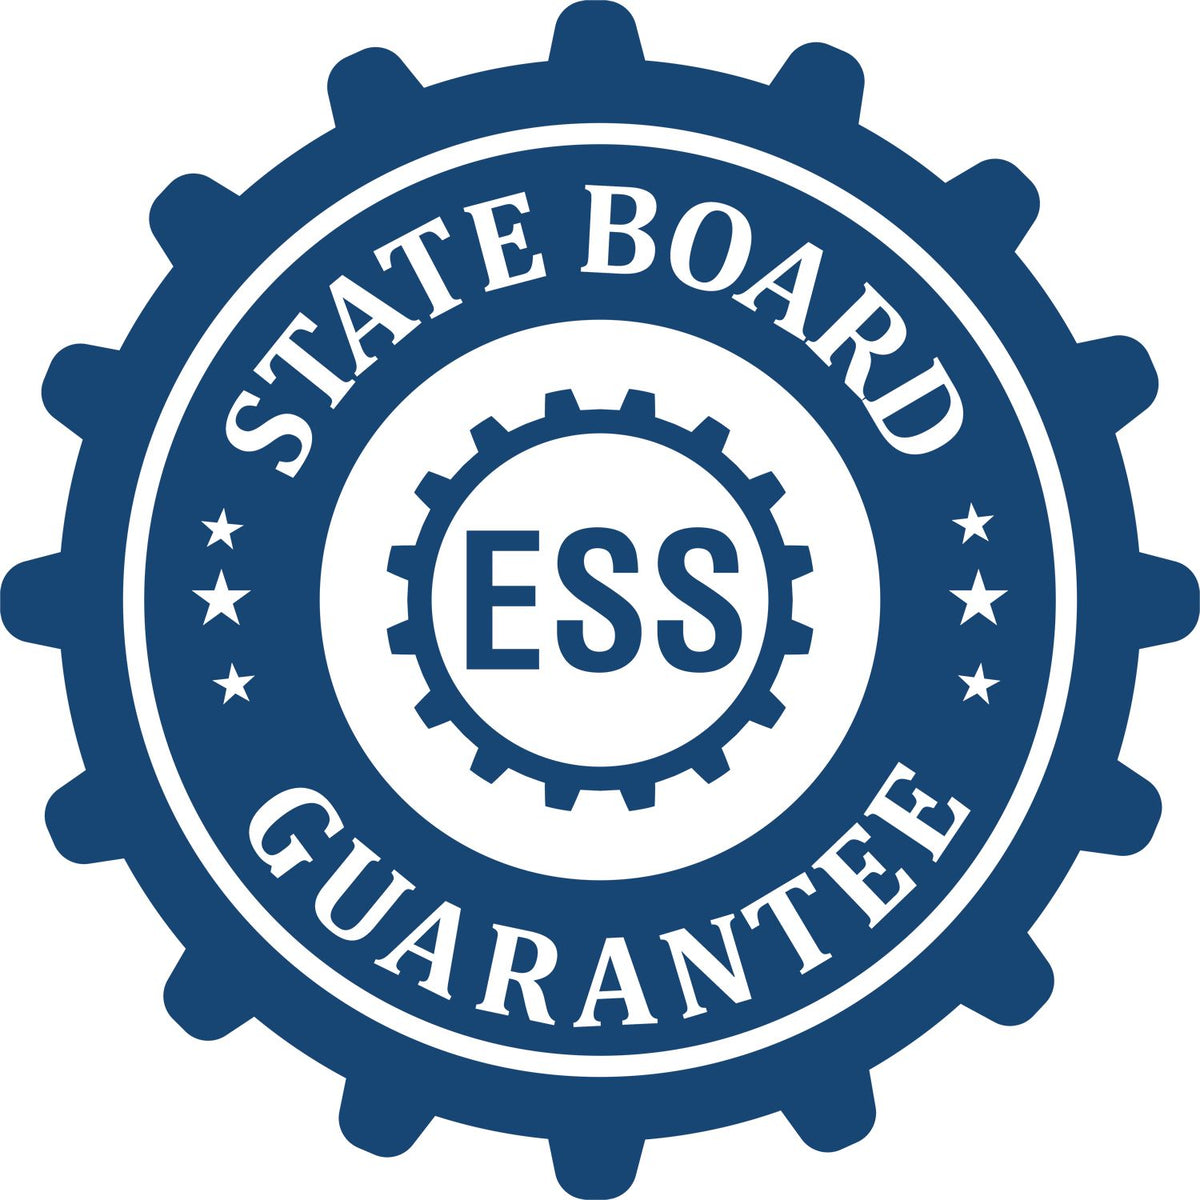 An emblem in a gear shape illustrating a state board guarantee for the State of Hawaii Extended Long Reach Engineer Seal product.